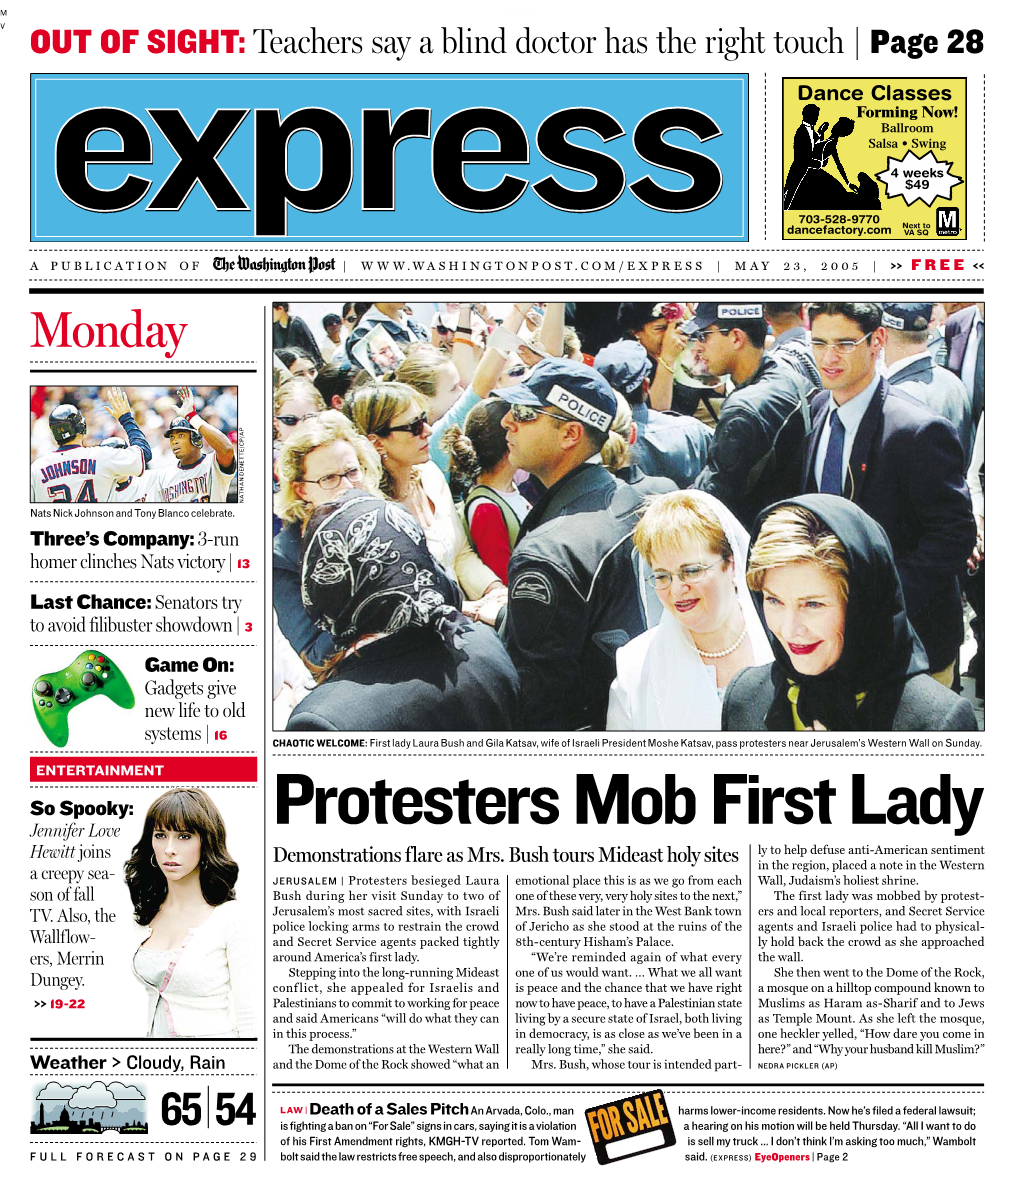 Protesters Mob First Lady